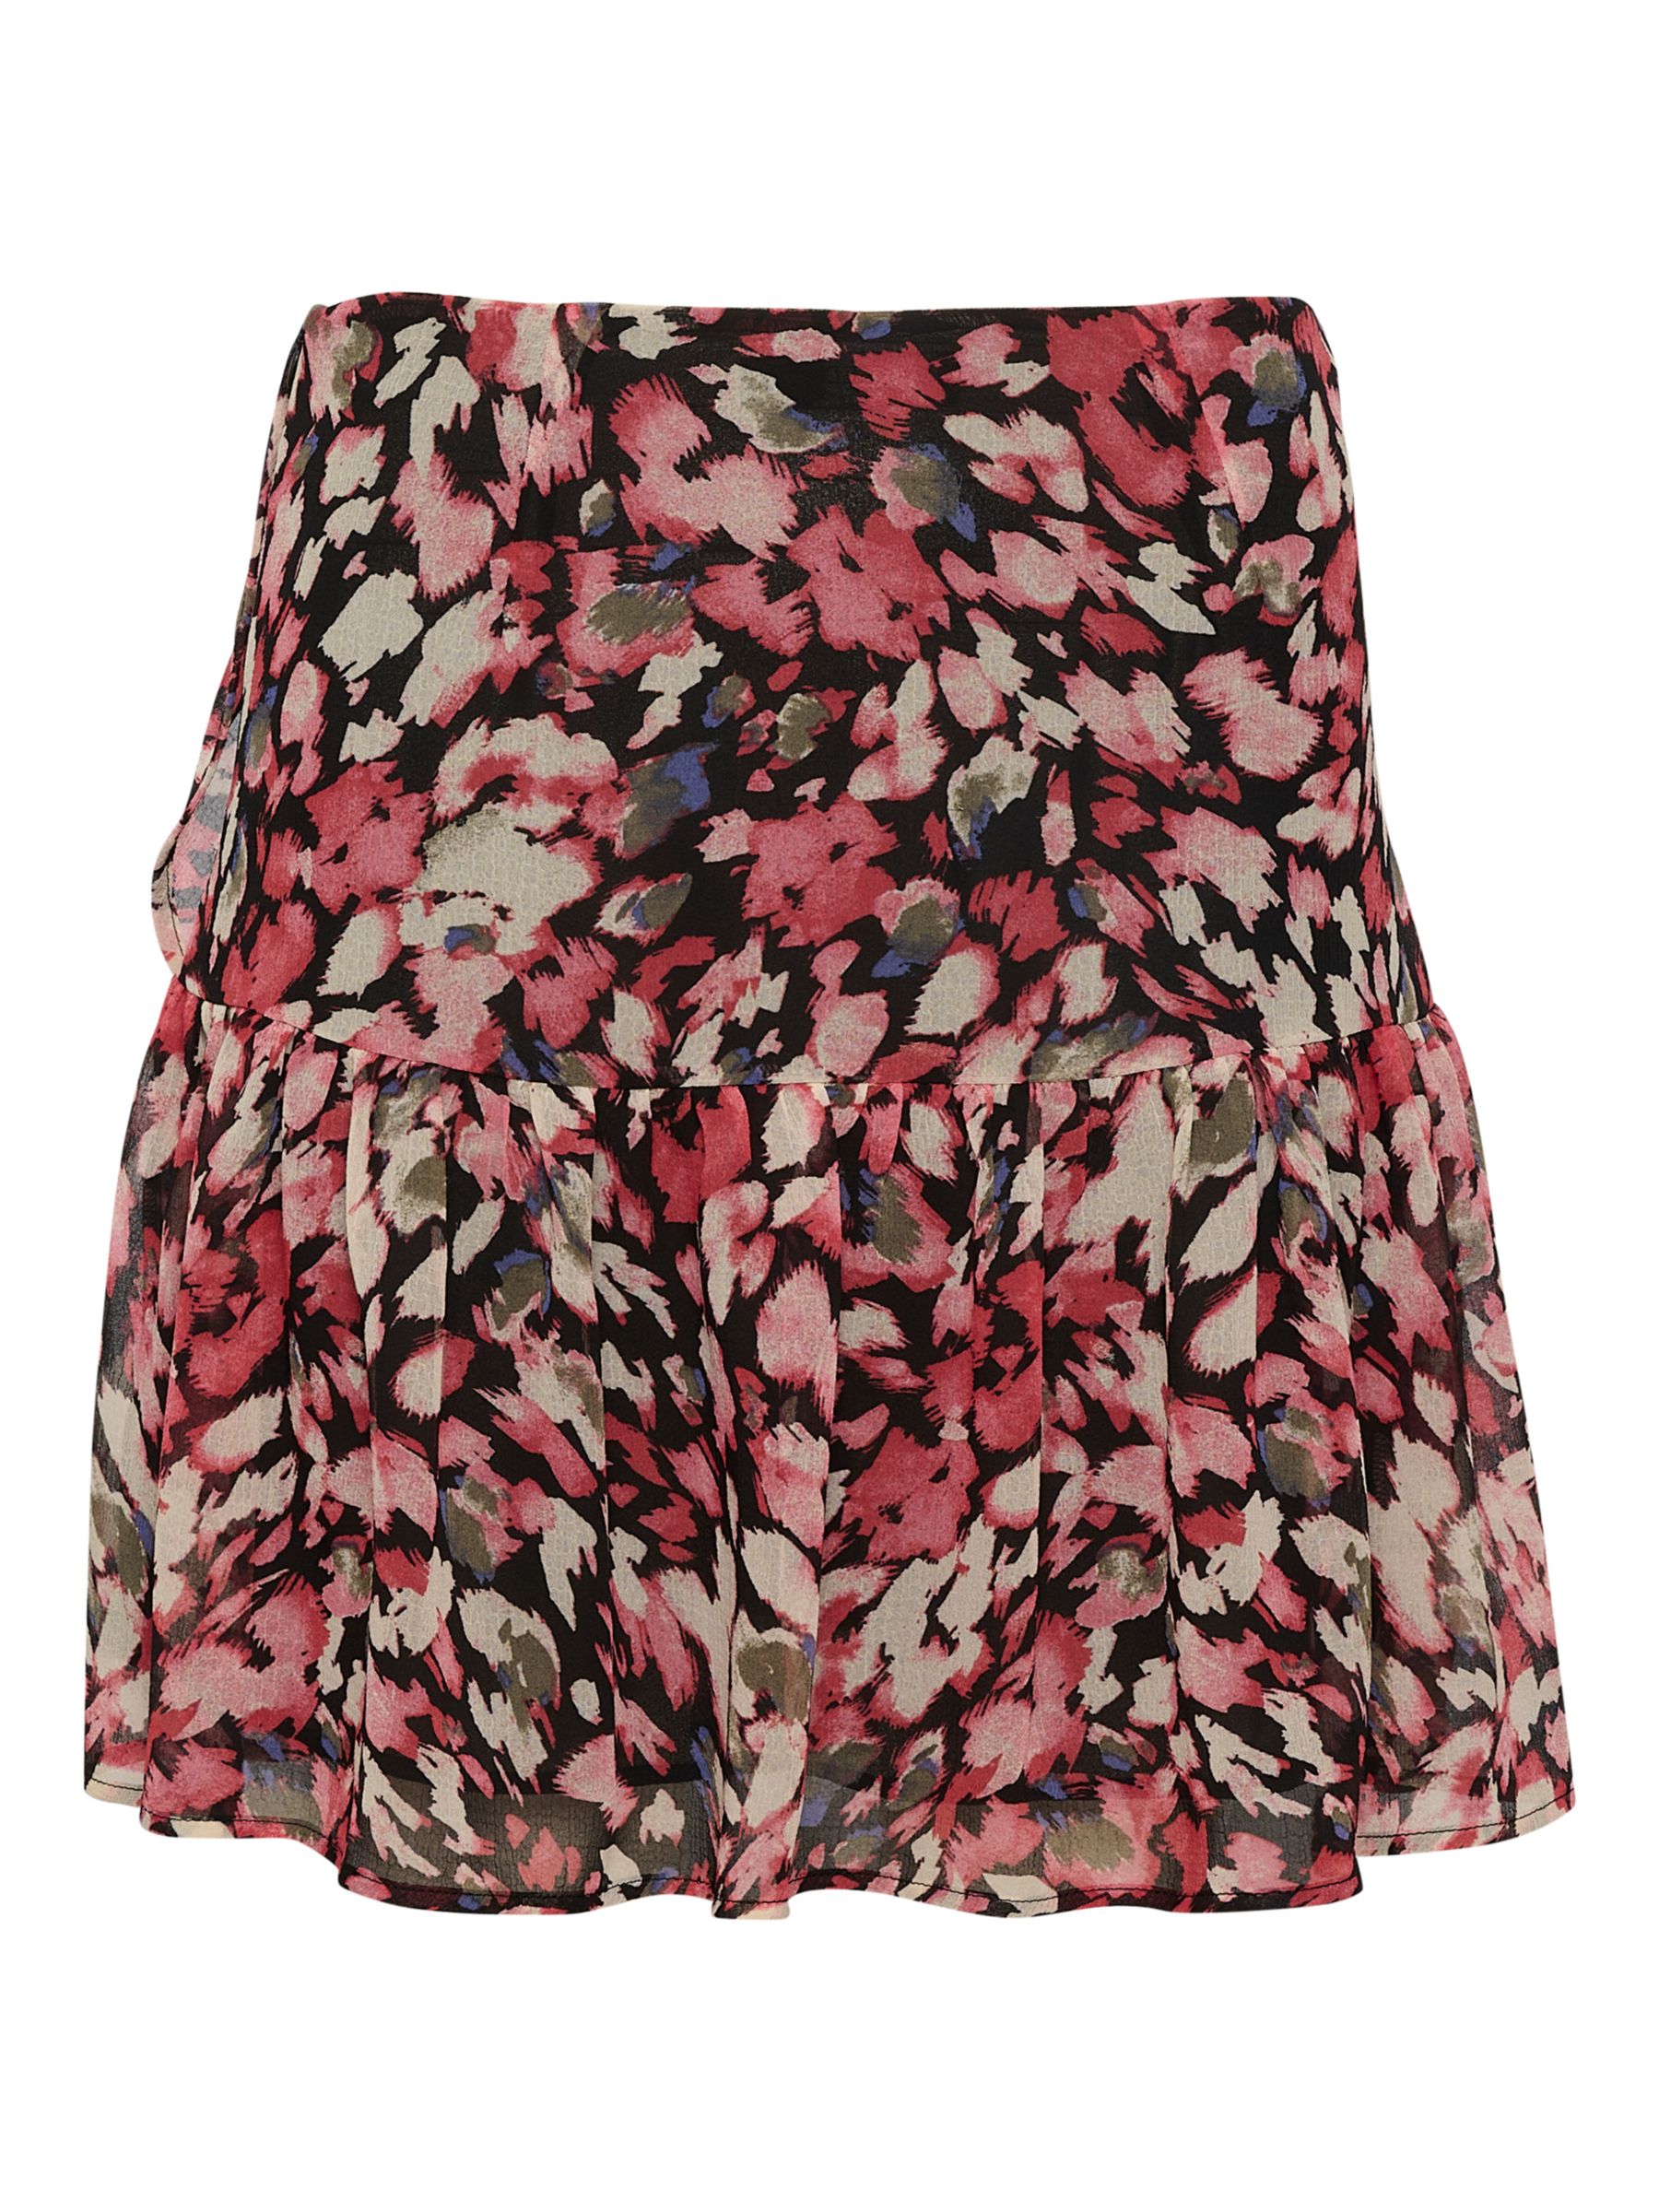 Buy Soaked In Luxury Luciana Mini Skirt, Faded Rose Online at johnlewis.com